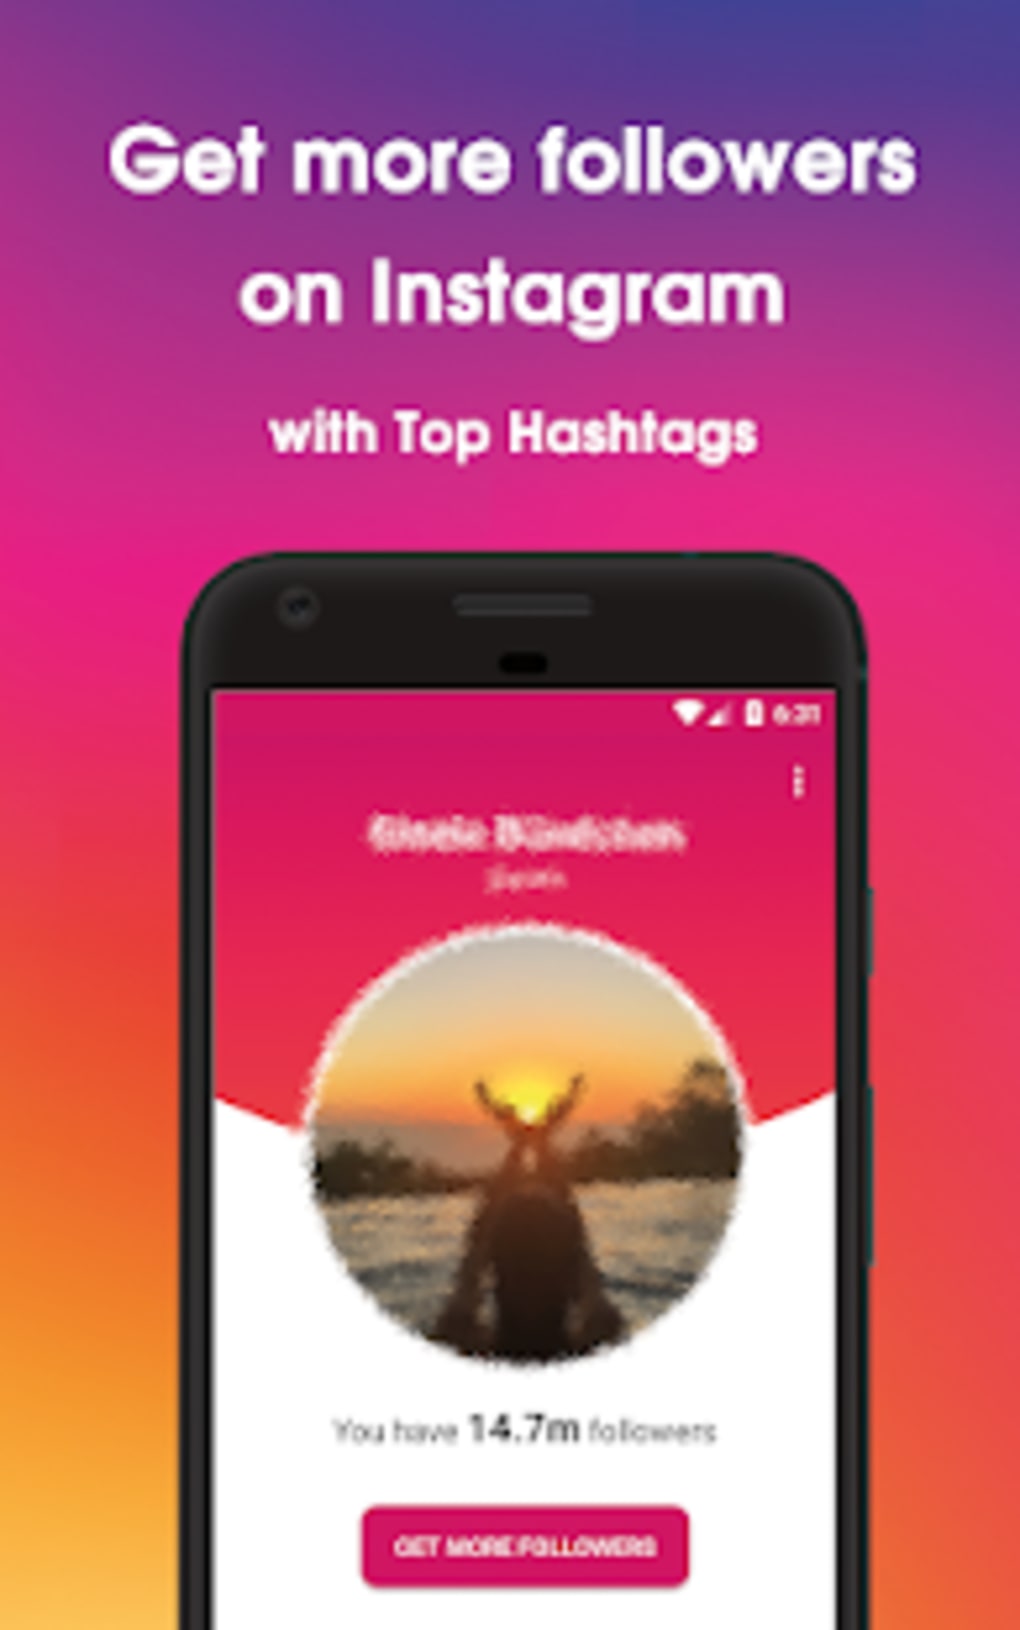 boostfollowers get more followers using hashtags - how to get more followers on instagram app android